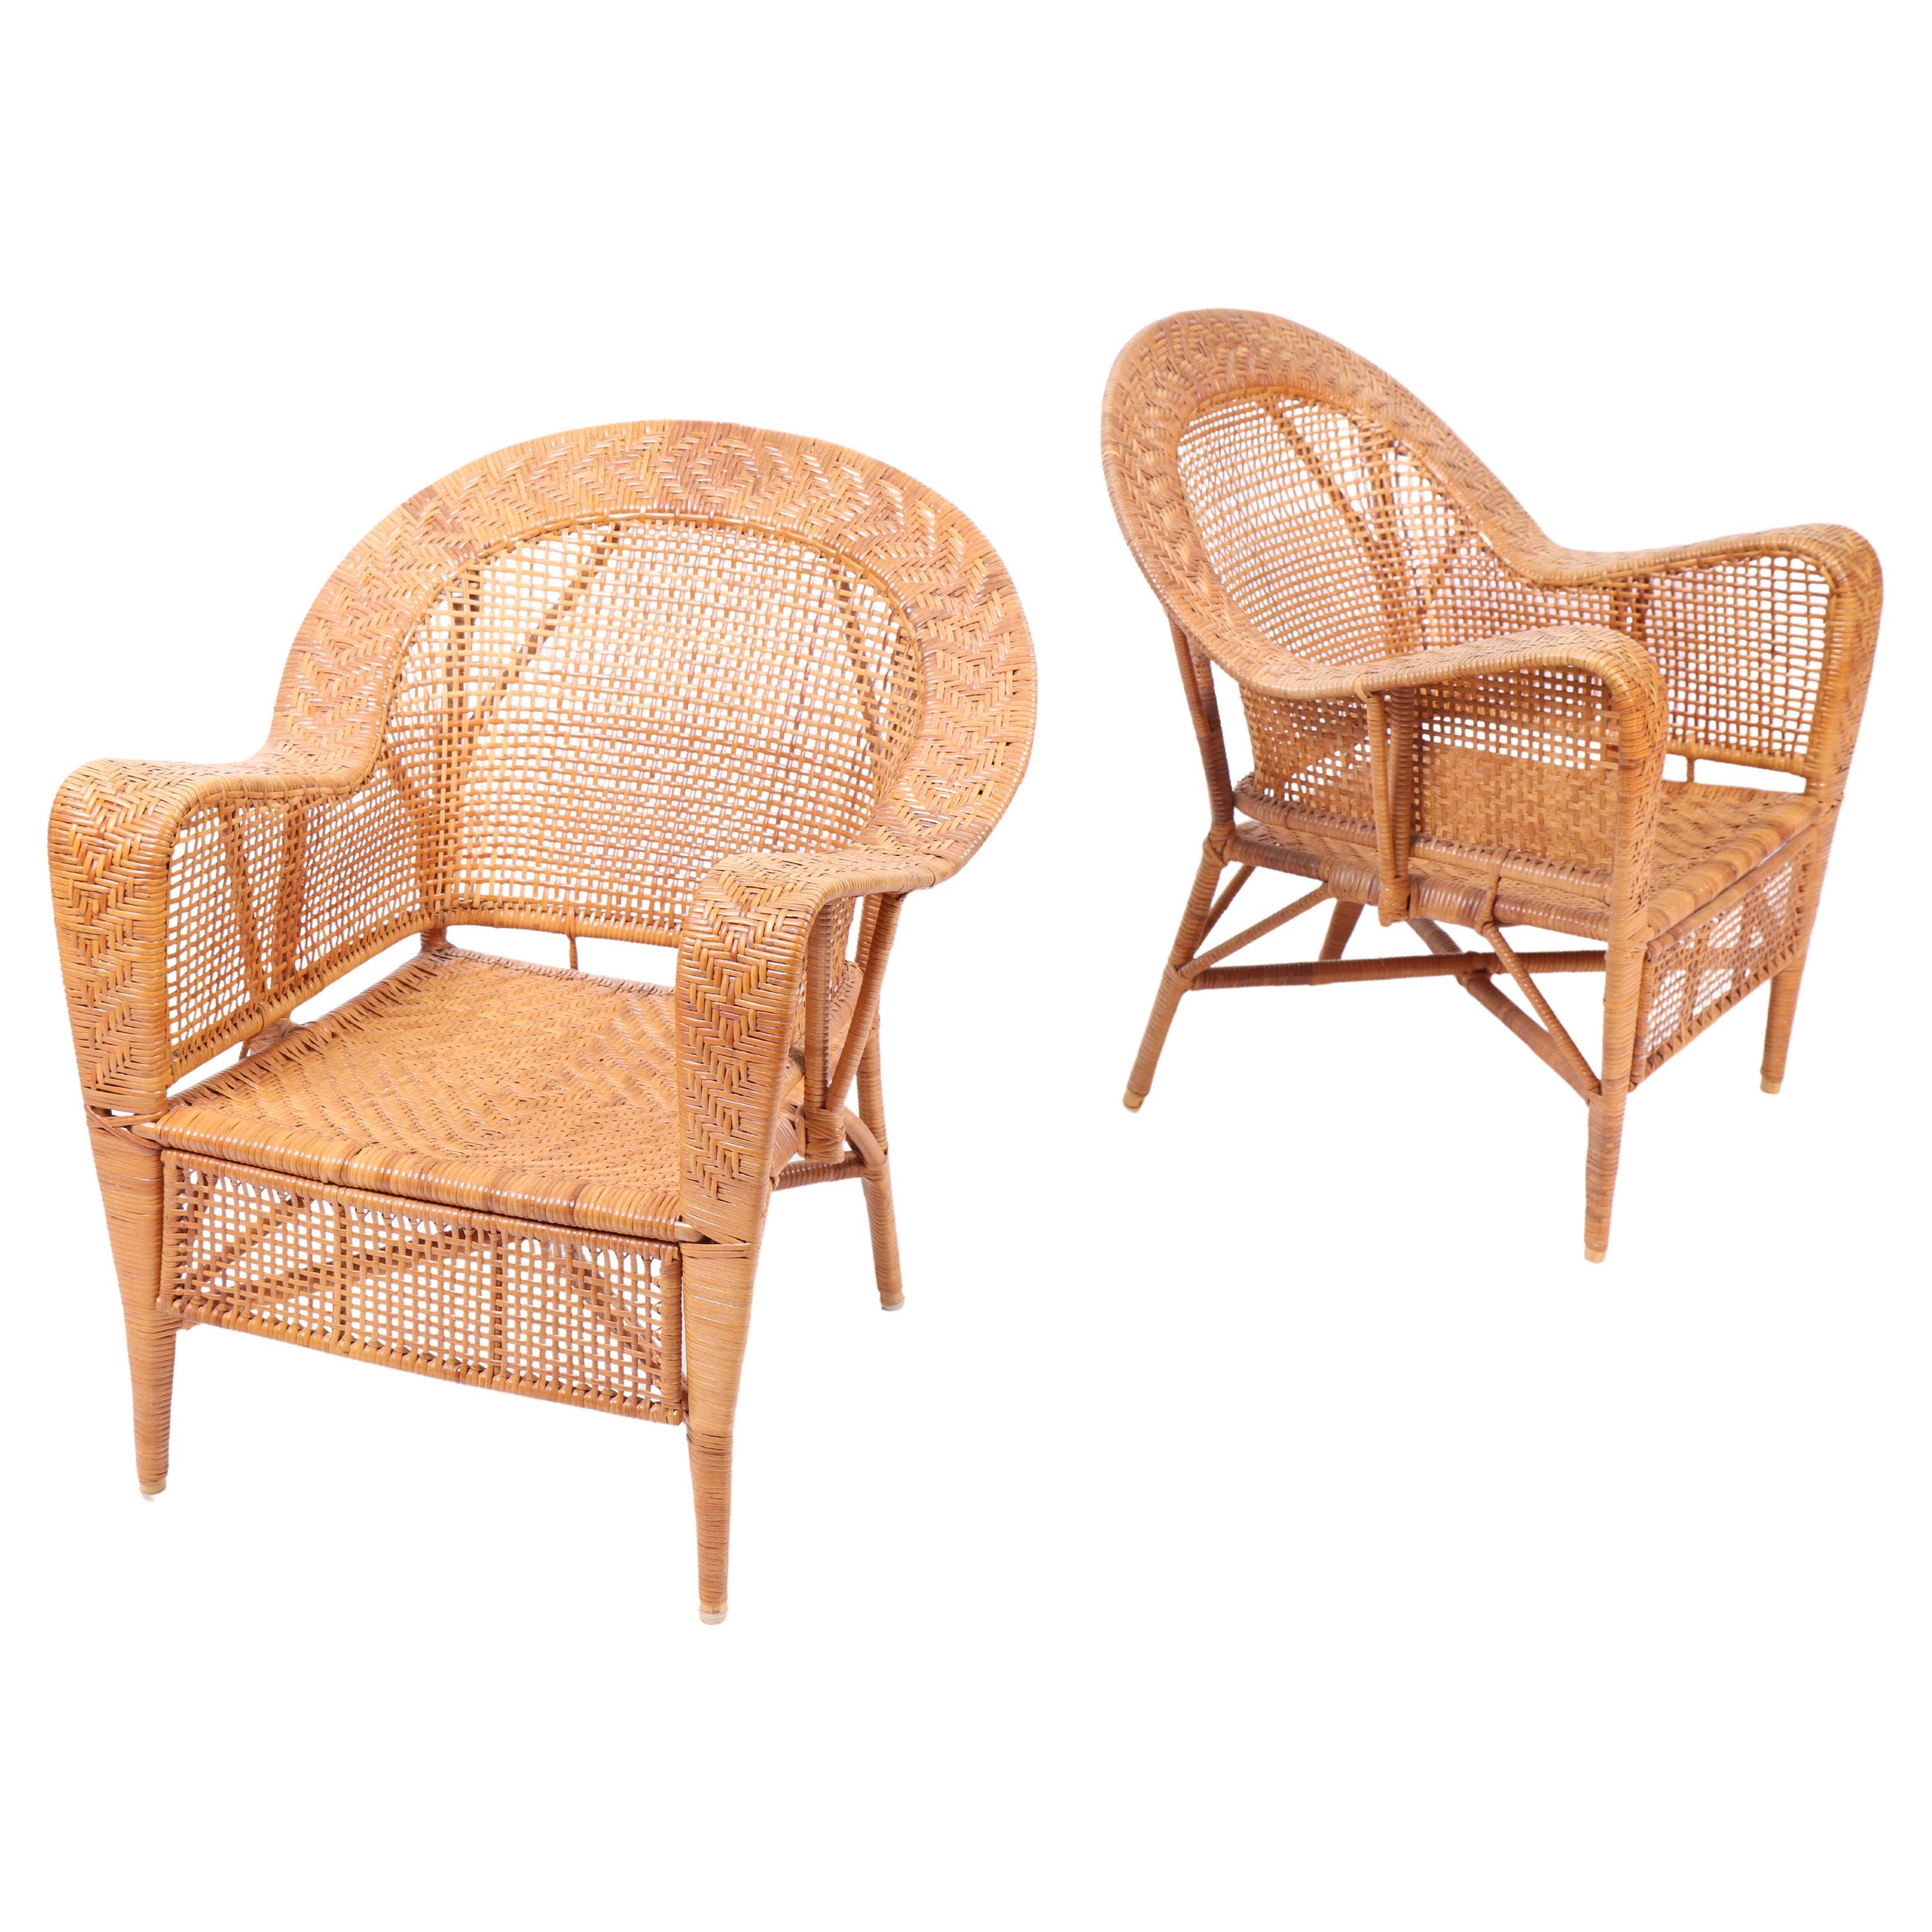 Pair of Rattan Lounge Chairs by Kay Fisker, 1950s For Sale